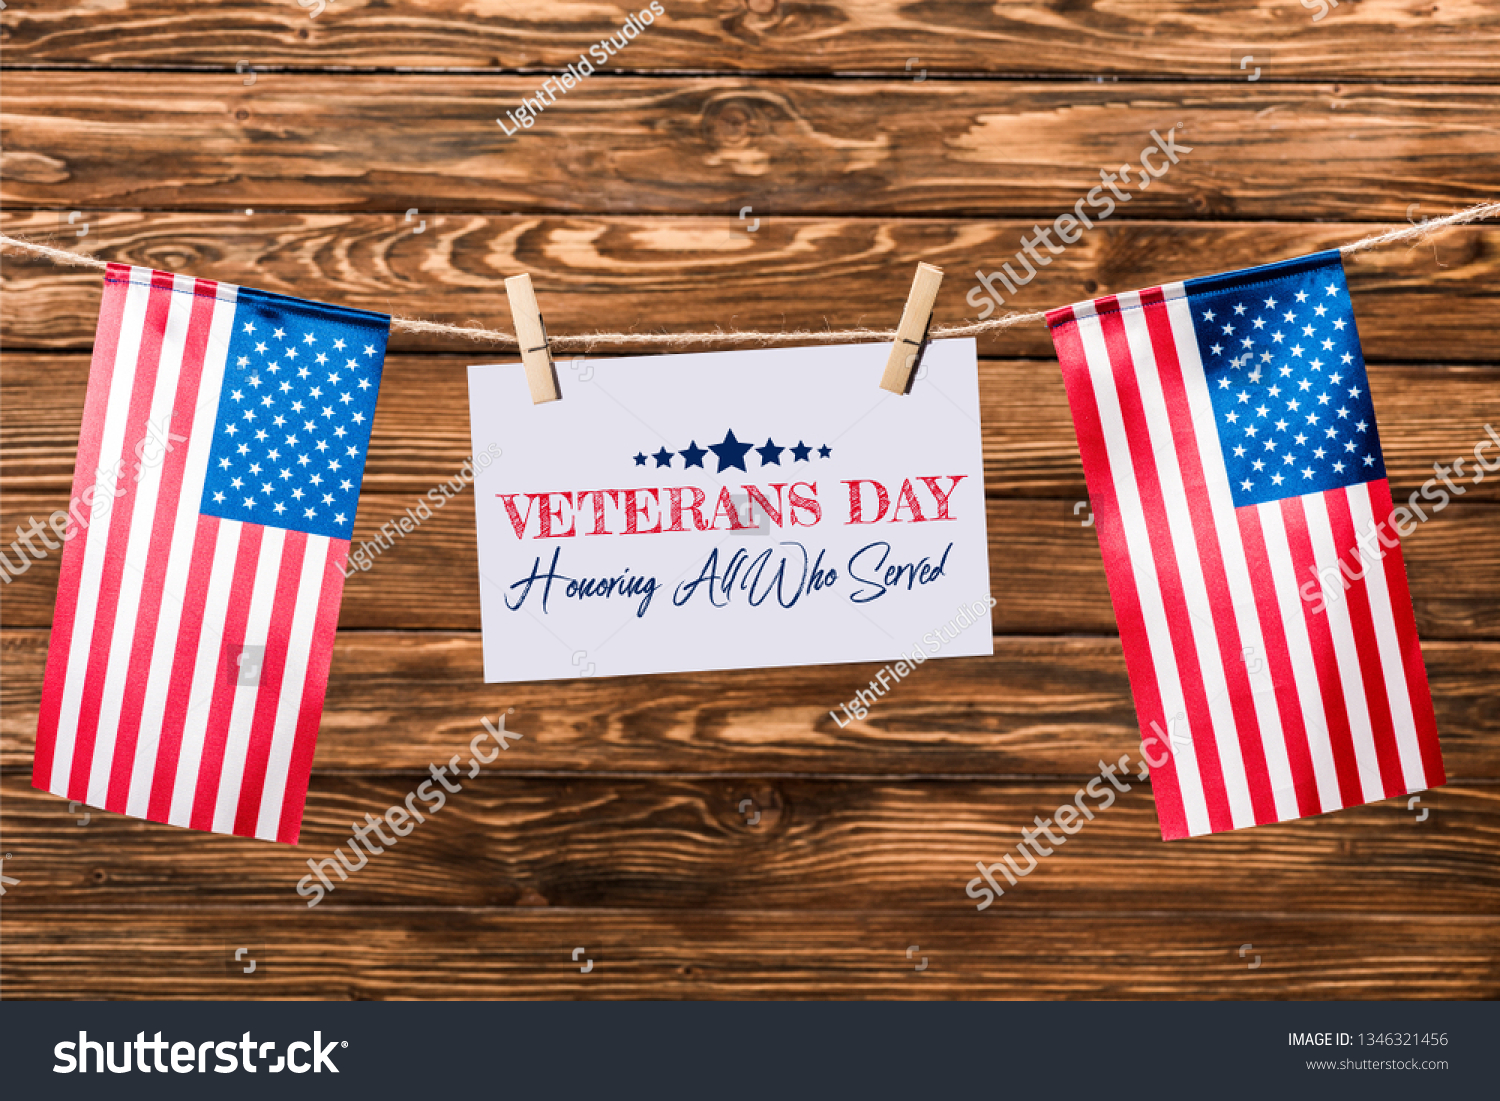 card with veterans day lettering hanging on string with pins and american flags on wooden background #1346321456